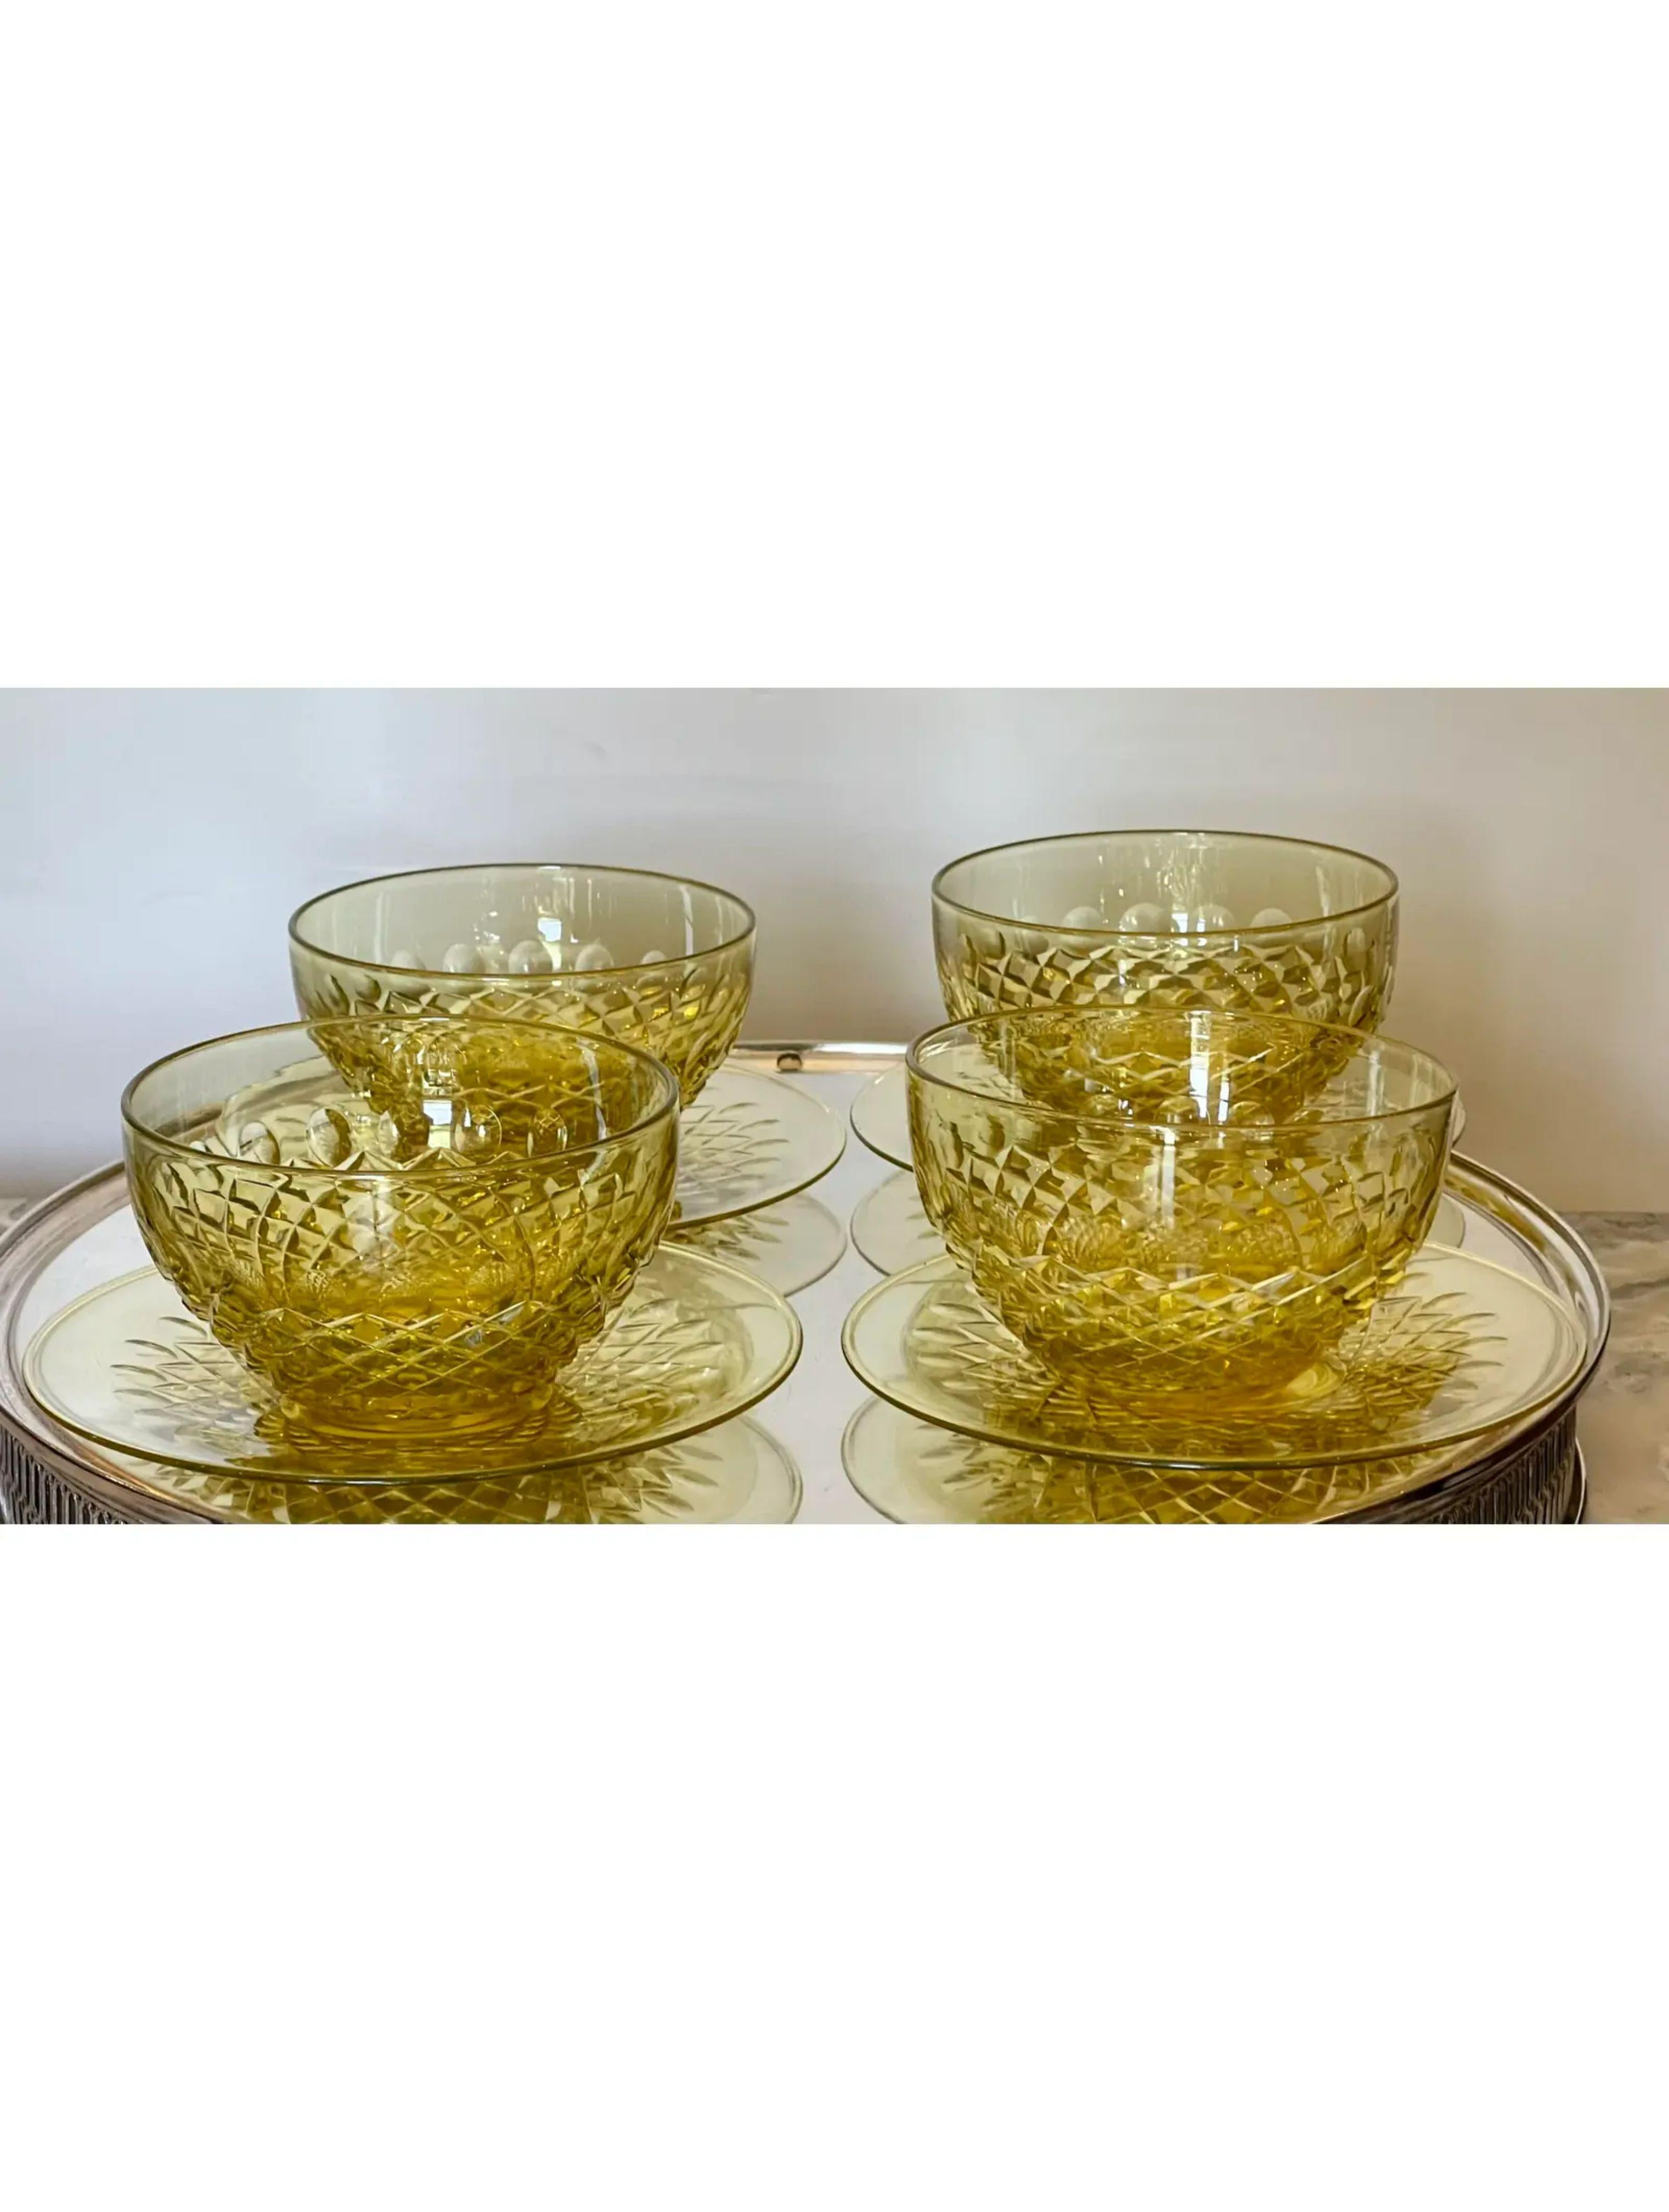 Antique Frederick Carder for Steuben Yellow Crystal Bowls & Underplates 8 Pc Set For Sale 1